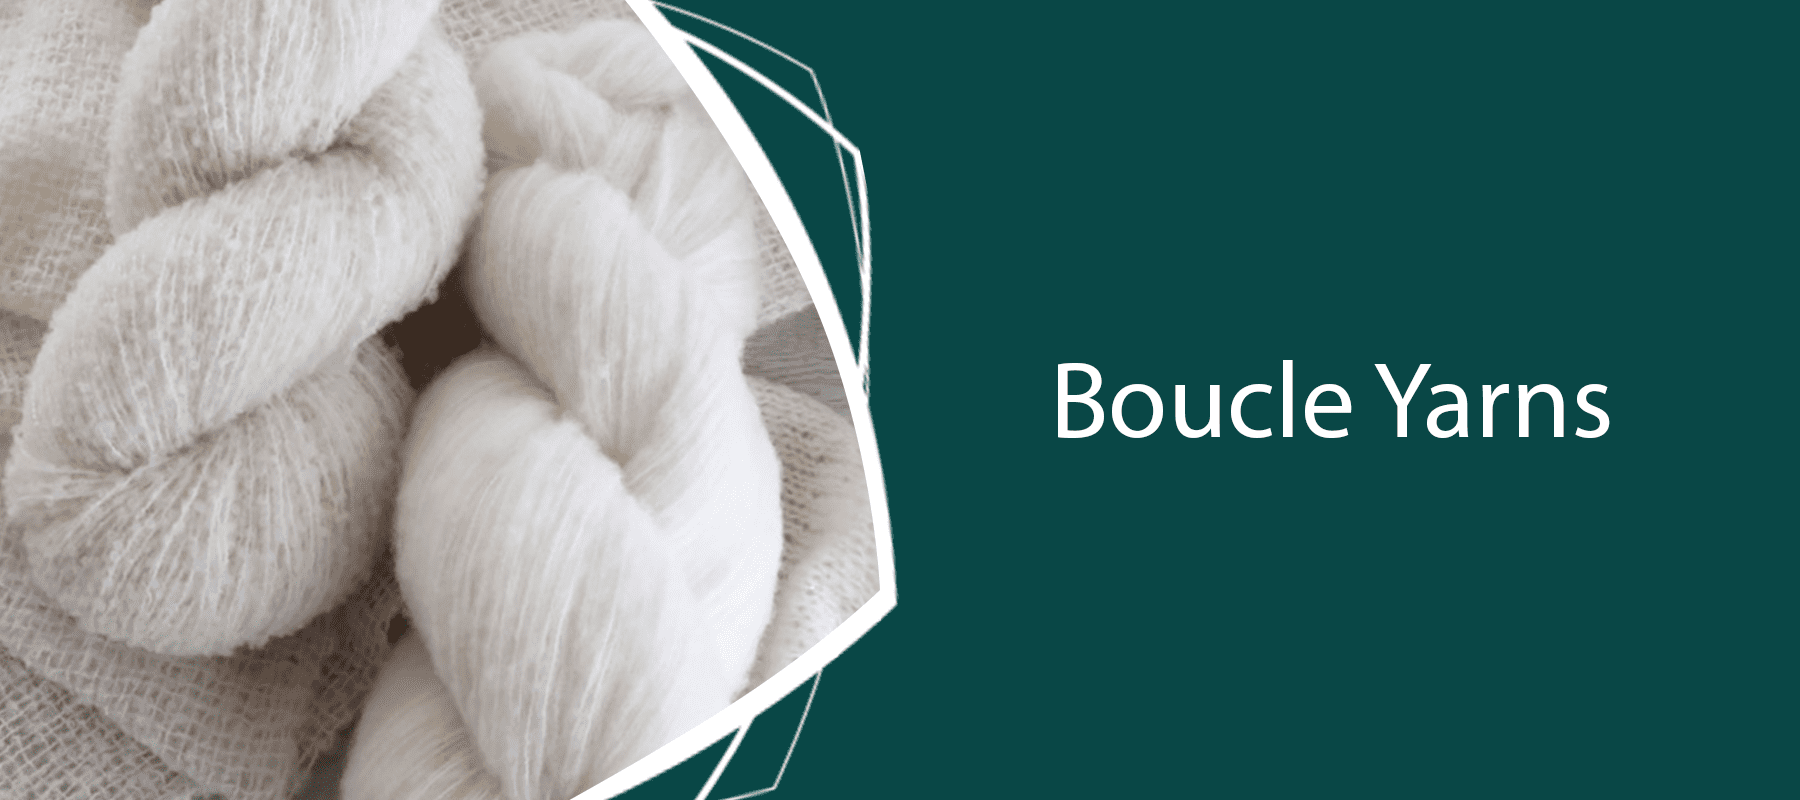 Boucle Yarns: Add Texture to Your Projects - Thread Collective Australia 